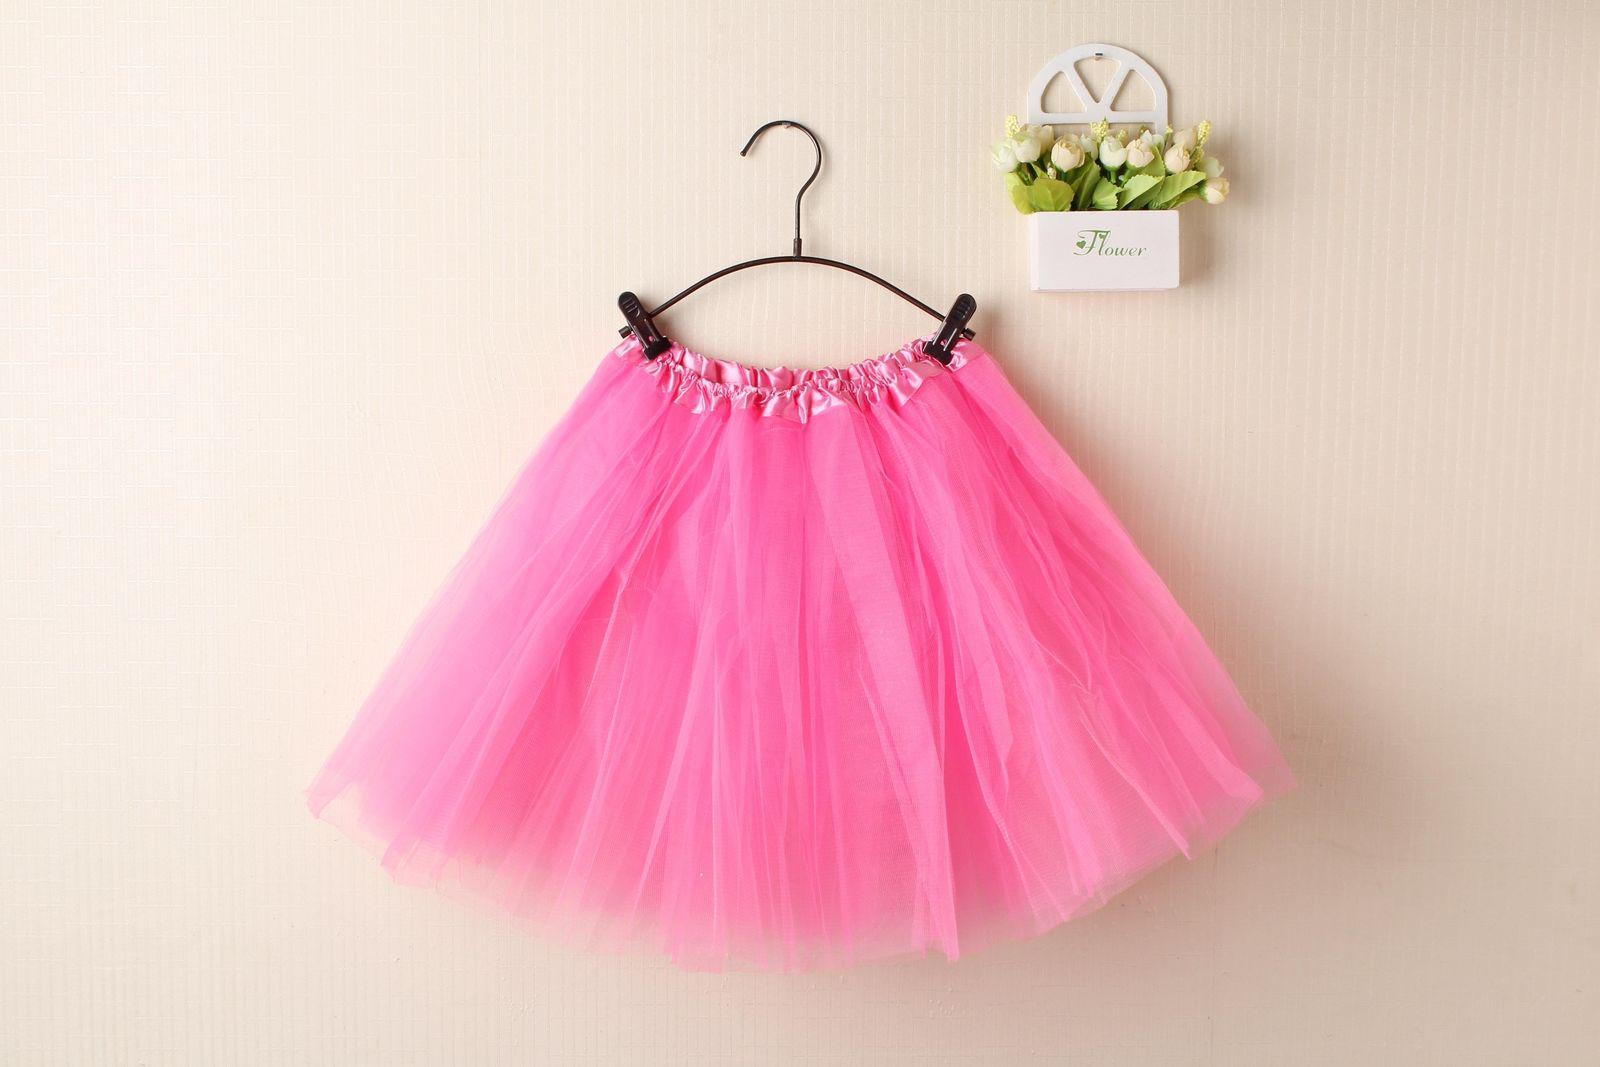 New Adults Tulle Tutu Skirt Dressup Party Costume Ballet Womens Girls Dance Wear - Pink (Size: Kids)